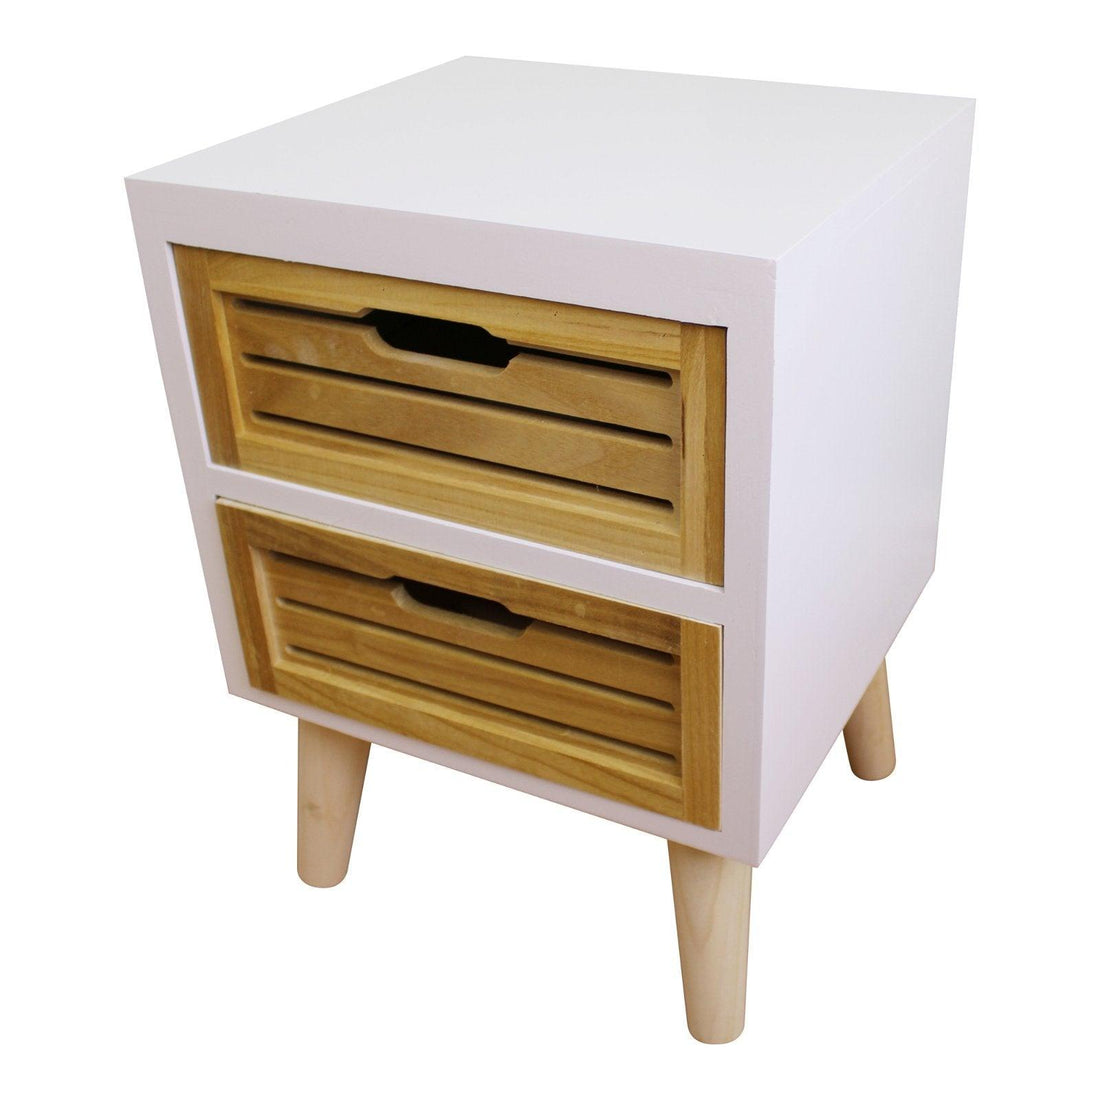 Compact 2 Drawer Unit with Removable Legs - £61.99 - Storage Units 